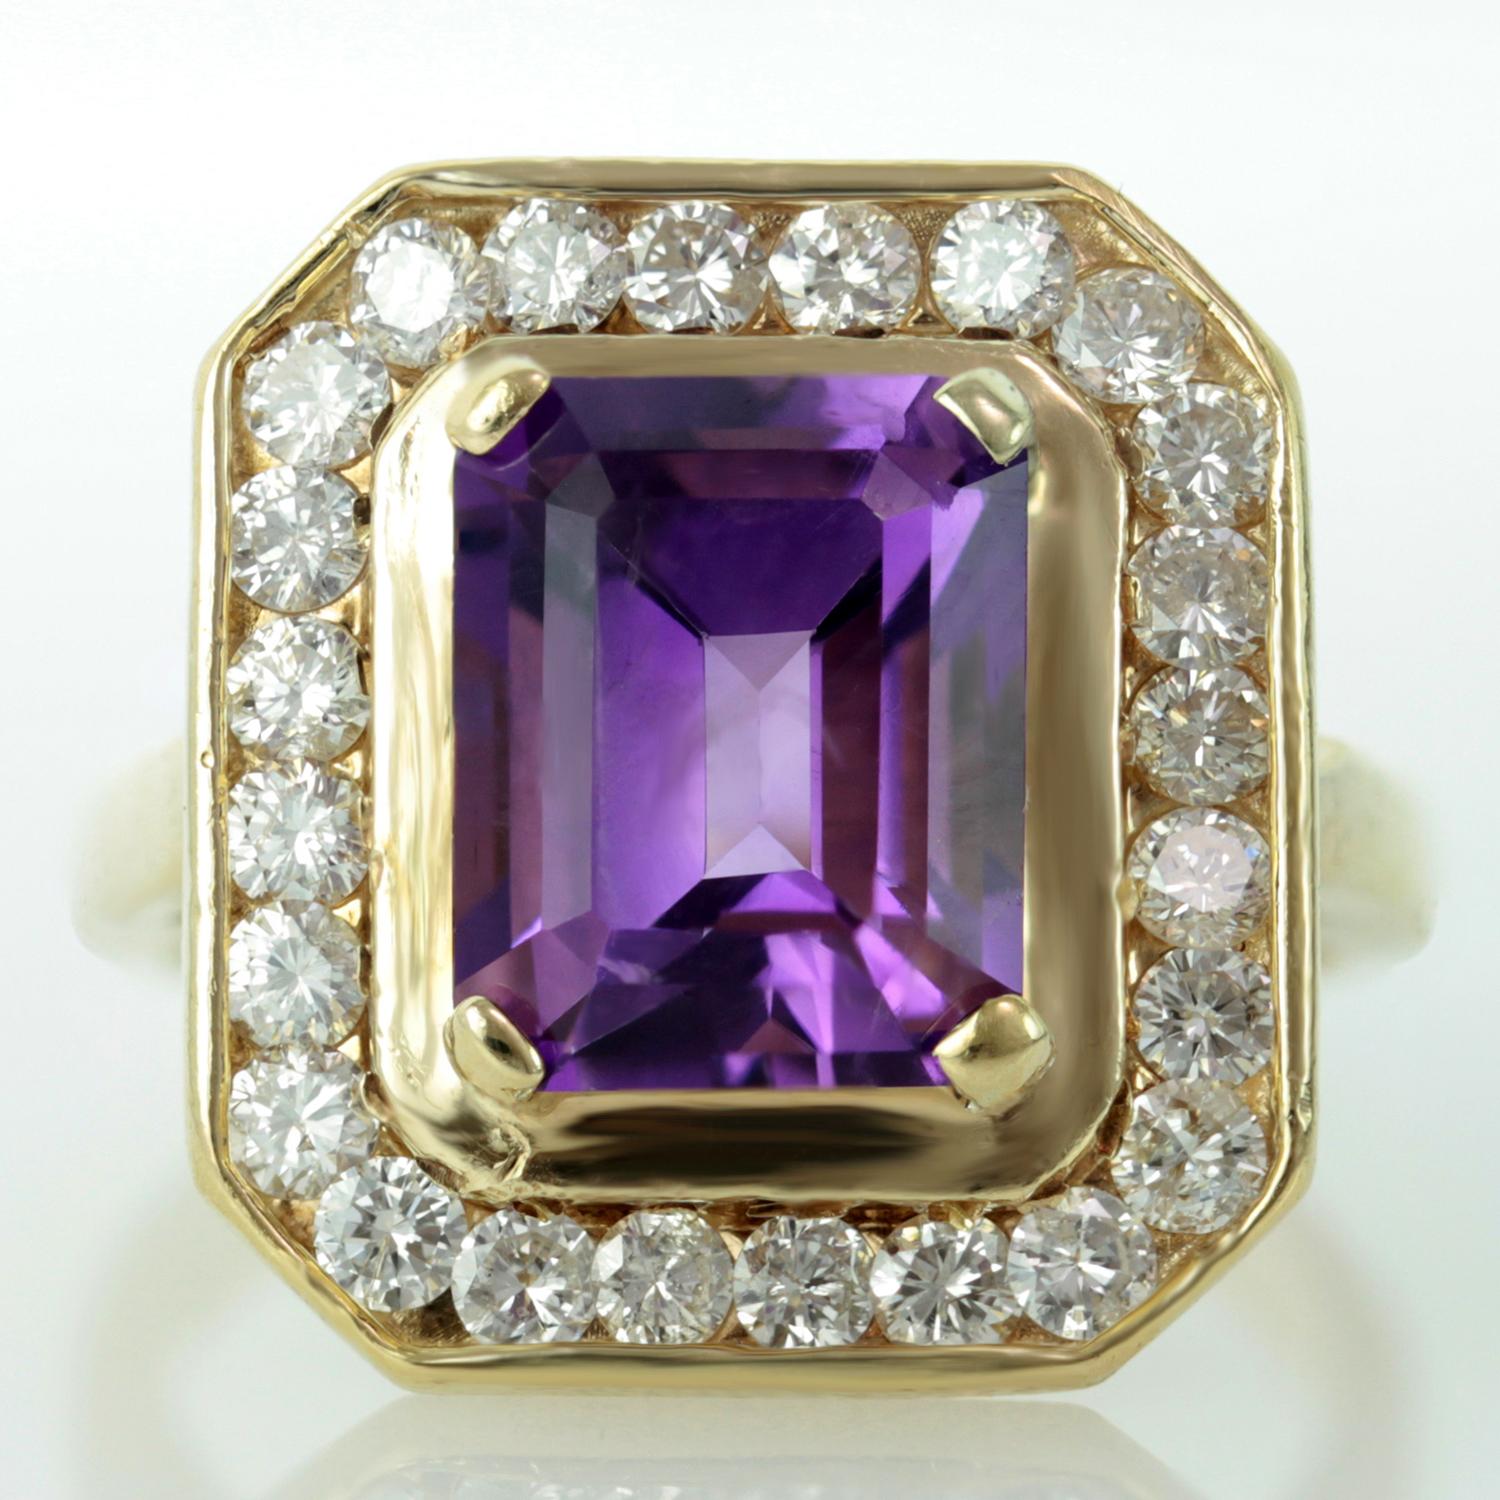 This stunning vintage women's ring is made in 14k yellow gold and set with a faceted 8.0mm x 10.0mm amethyst of an estimated 4.50 carats surrounded by sparkling round H-I VS2-SI1 diamonds of an estimated 1.0 carats. Circa 1960s. Measurements: 0.70